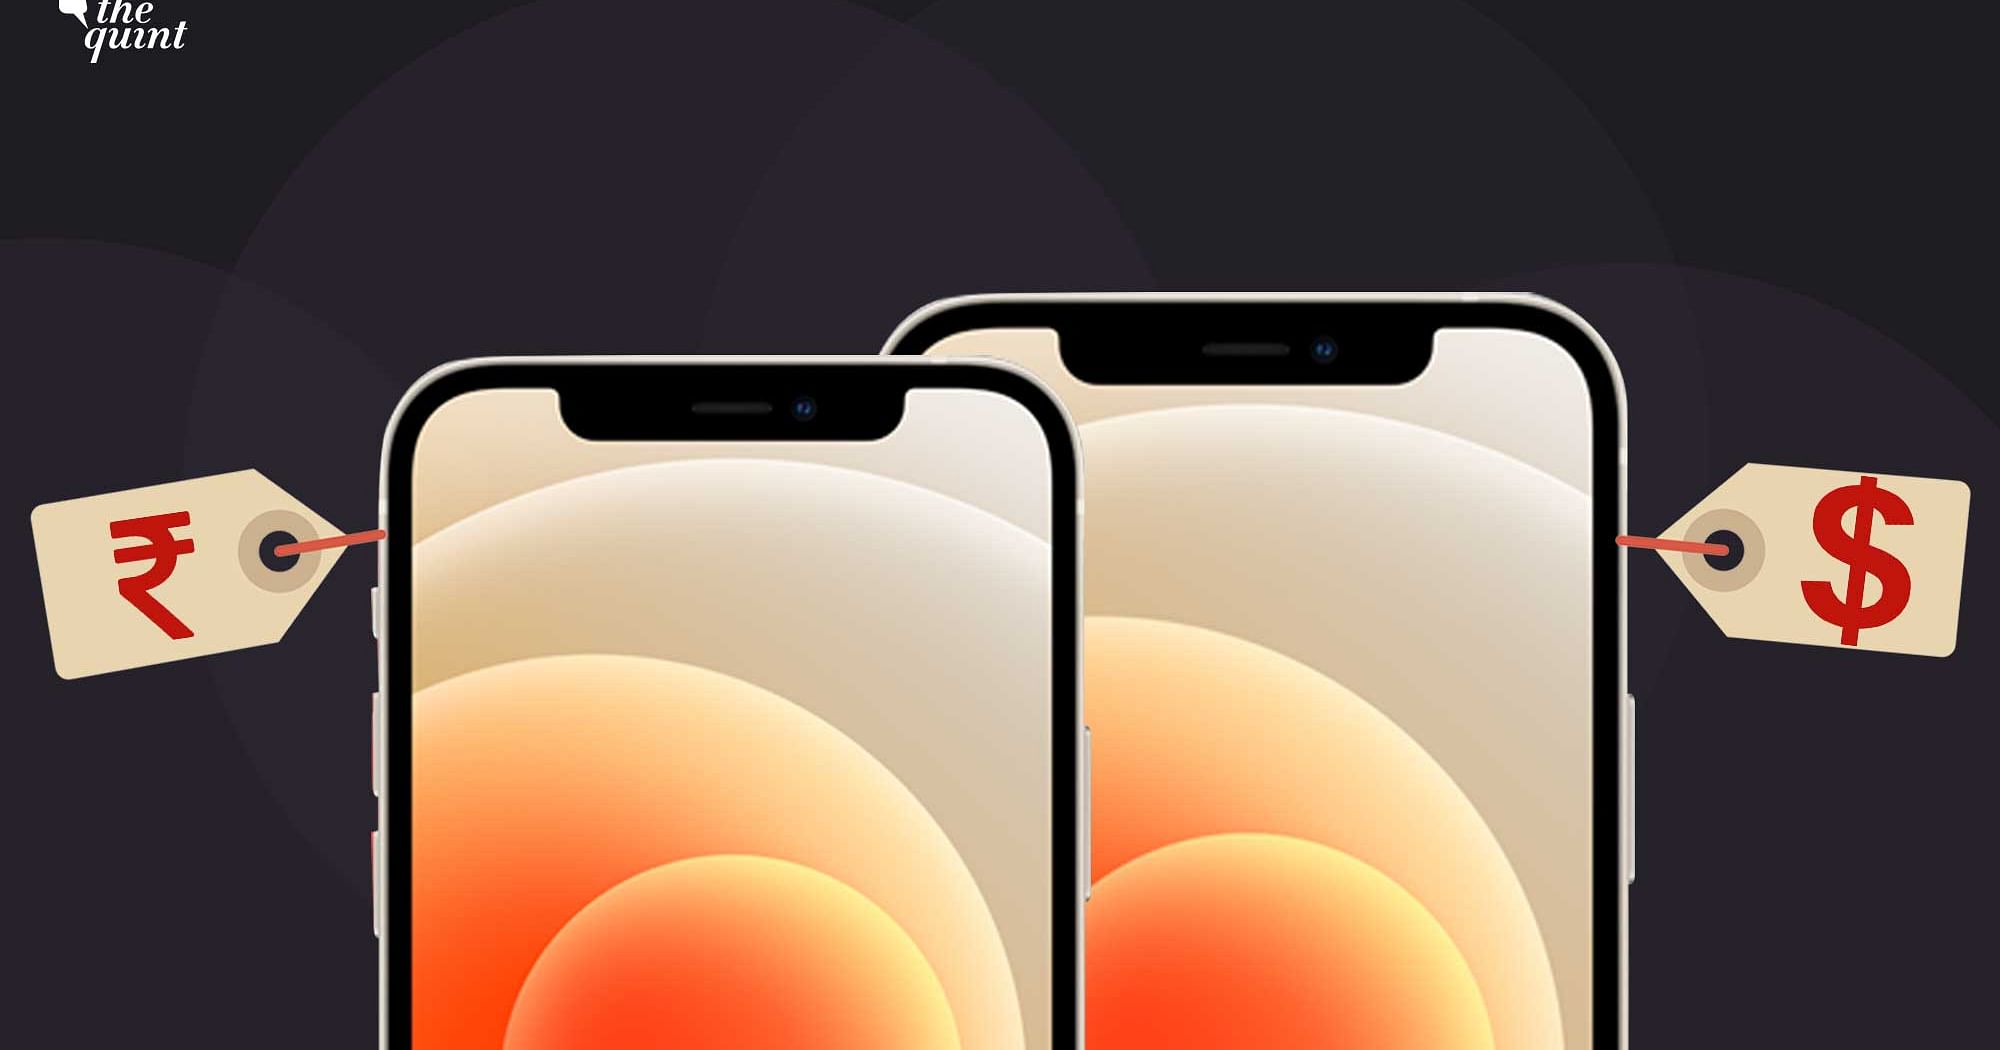 Sunny Optical becomes main iPhone 14 lens supplier, says Kuo